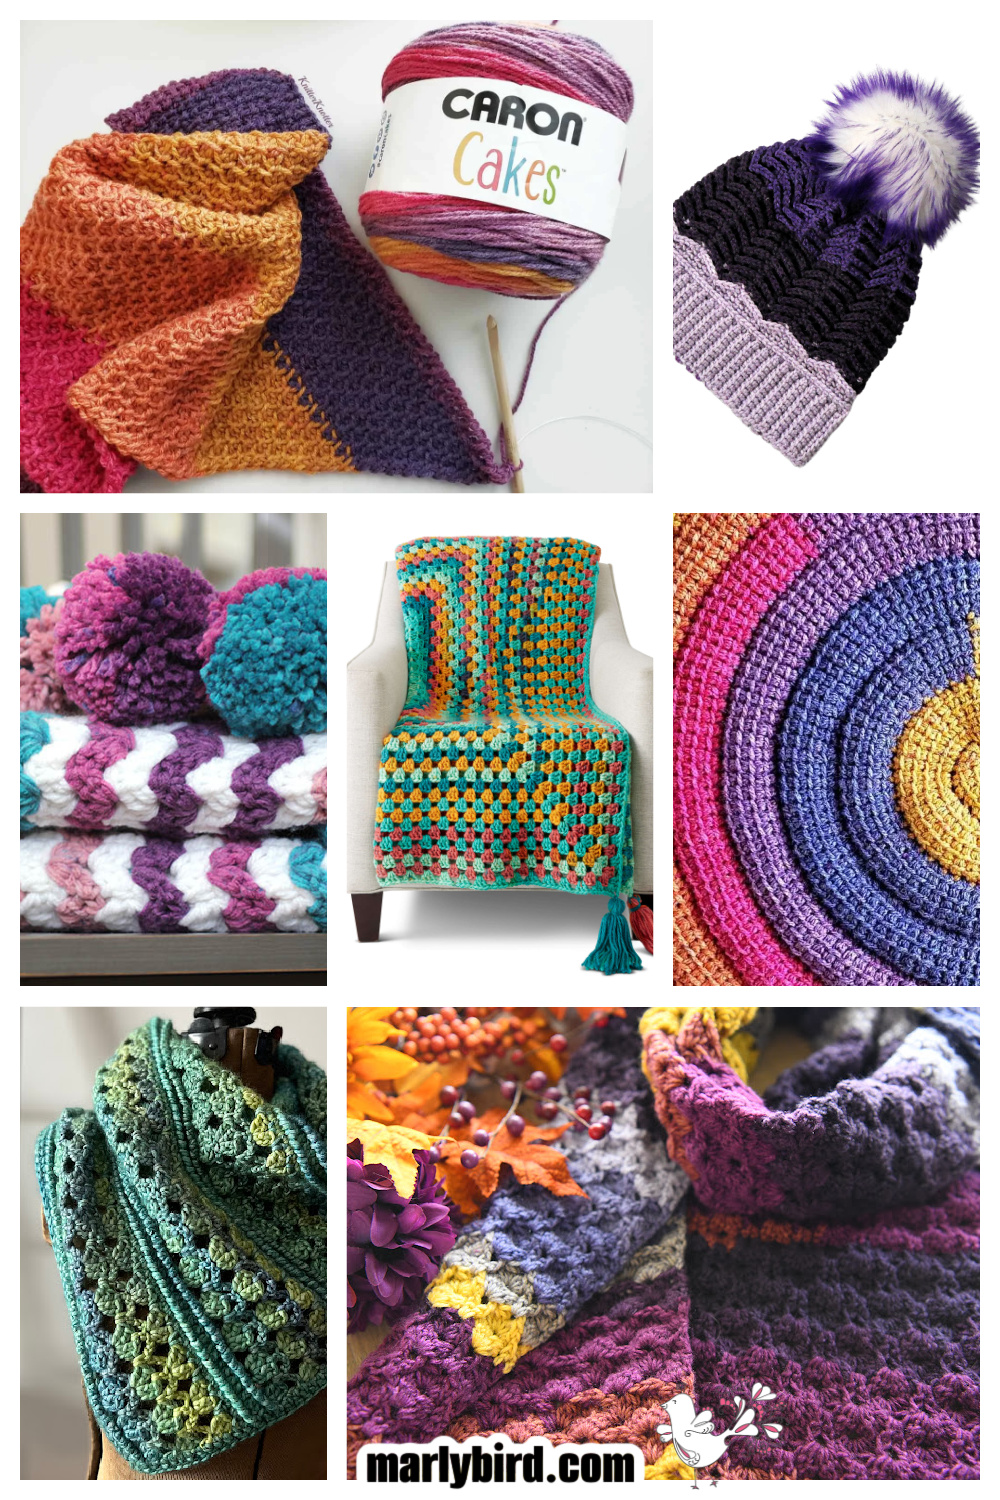 At Marly Bird we've curated a whole collection of crochet patterns using Caron Cake Shop Yarns to help you create the perfect project - from easy crochet shawls to intricate crochet scarves, from simple triangle shawls to luxurious prayer shawls! Many of these patterns are made with basic stitches, so even beginners can feel creative when making crocheted scarves, crochet hats, and rectangle shawls. Visit the blog to get these modern, paid for and free crochet patterns - Marly Bird